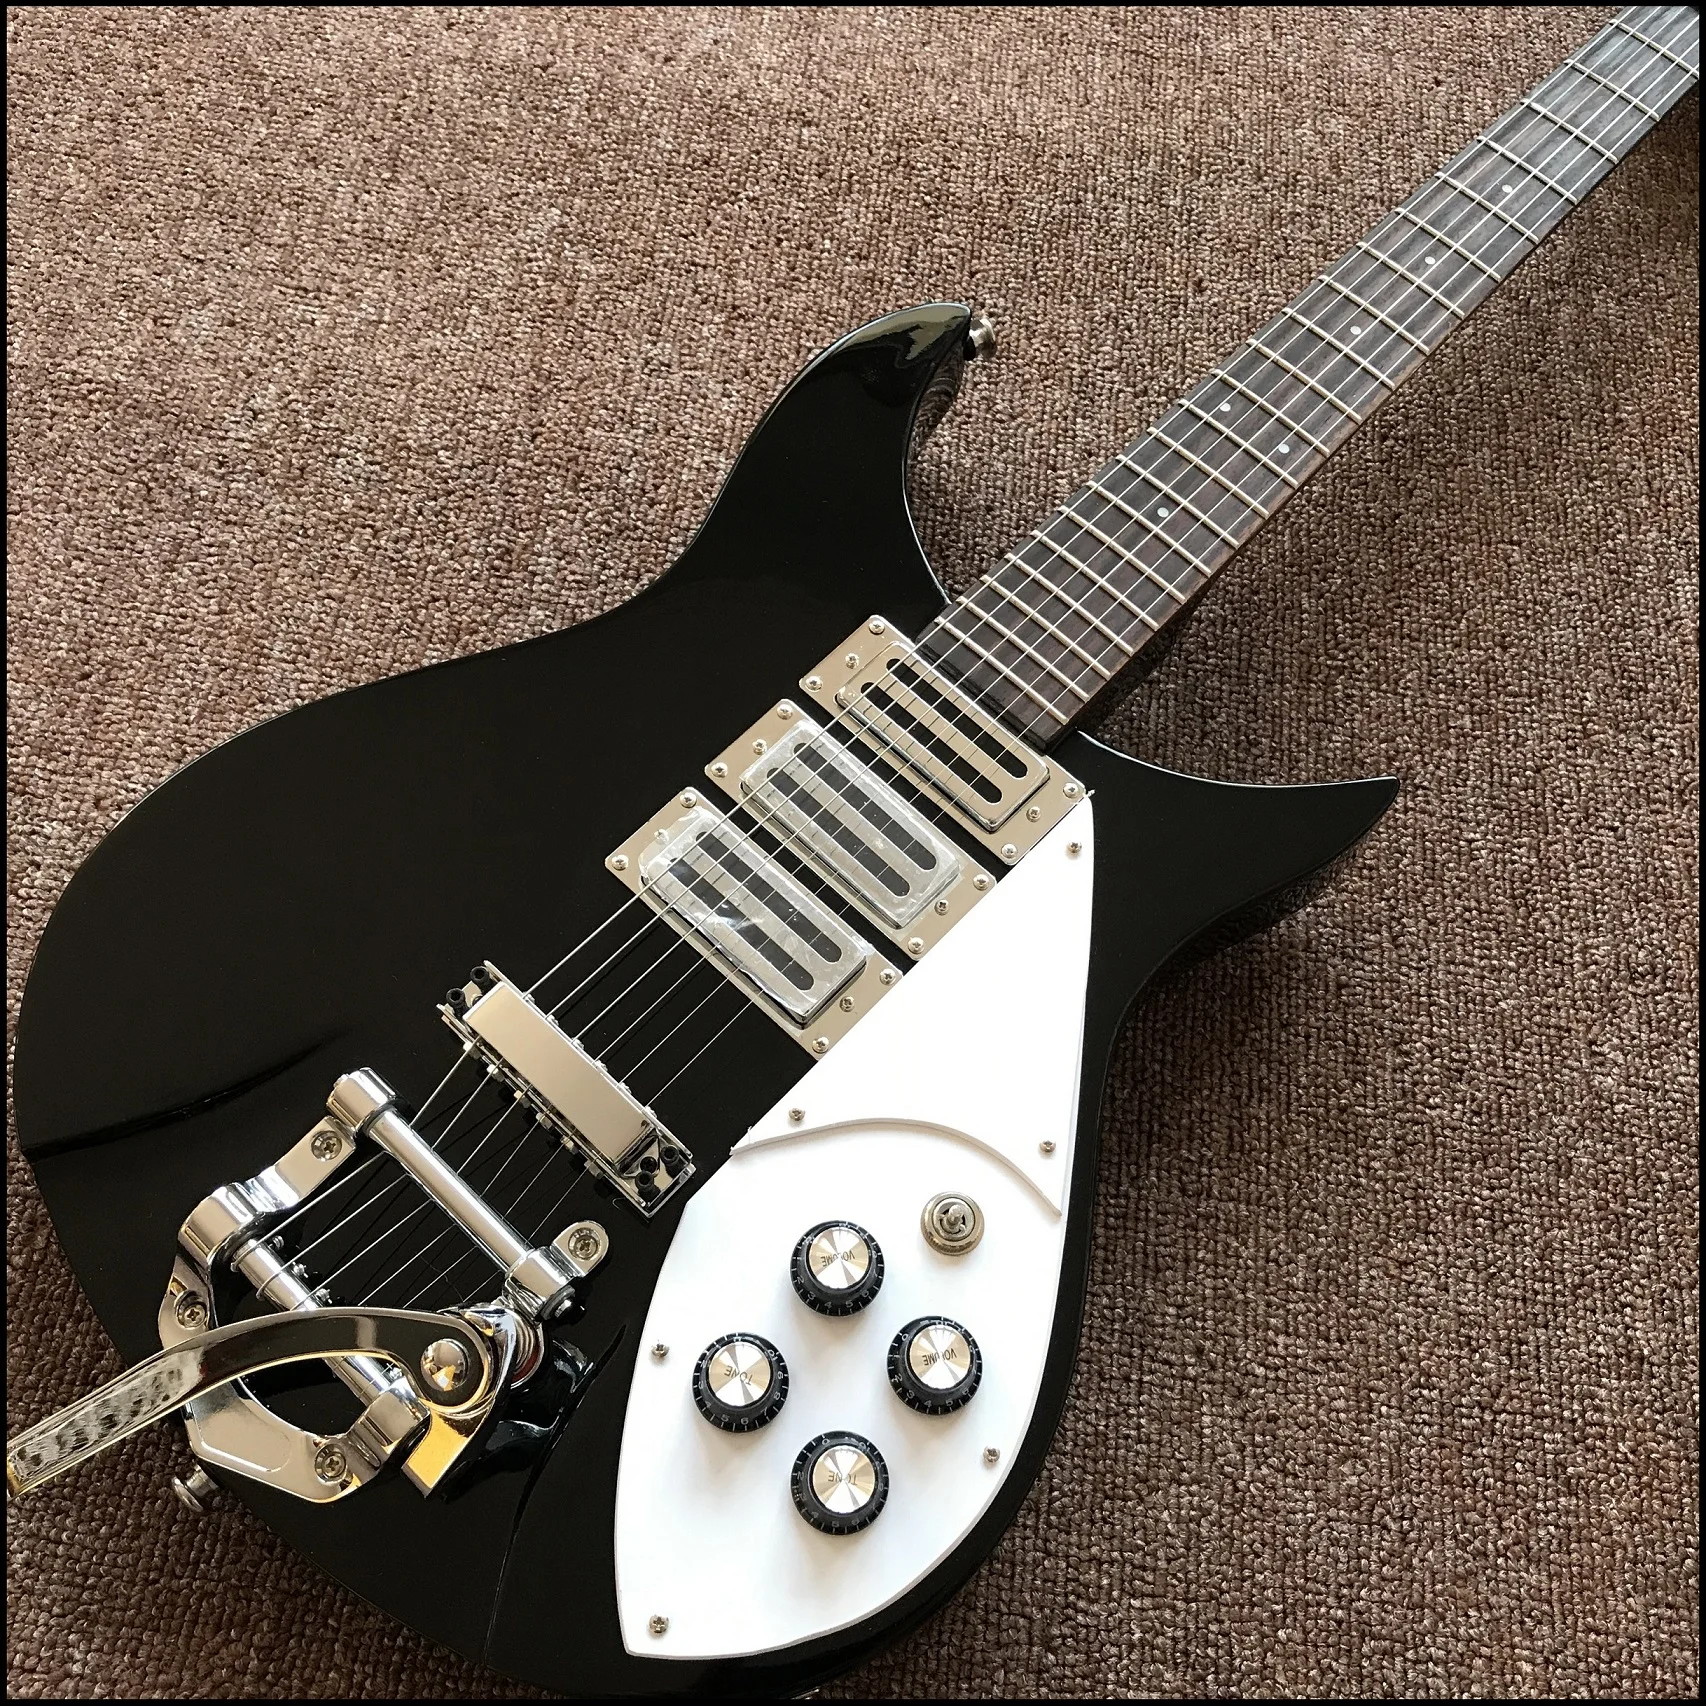 

2019 NEW Mini Rick 325 guitar,Black 6 Strings Electric Guitar with Vibrato Tailpiece,Slivery Fittings,Free Shipping